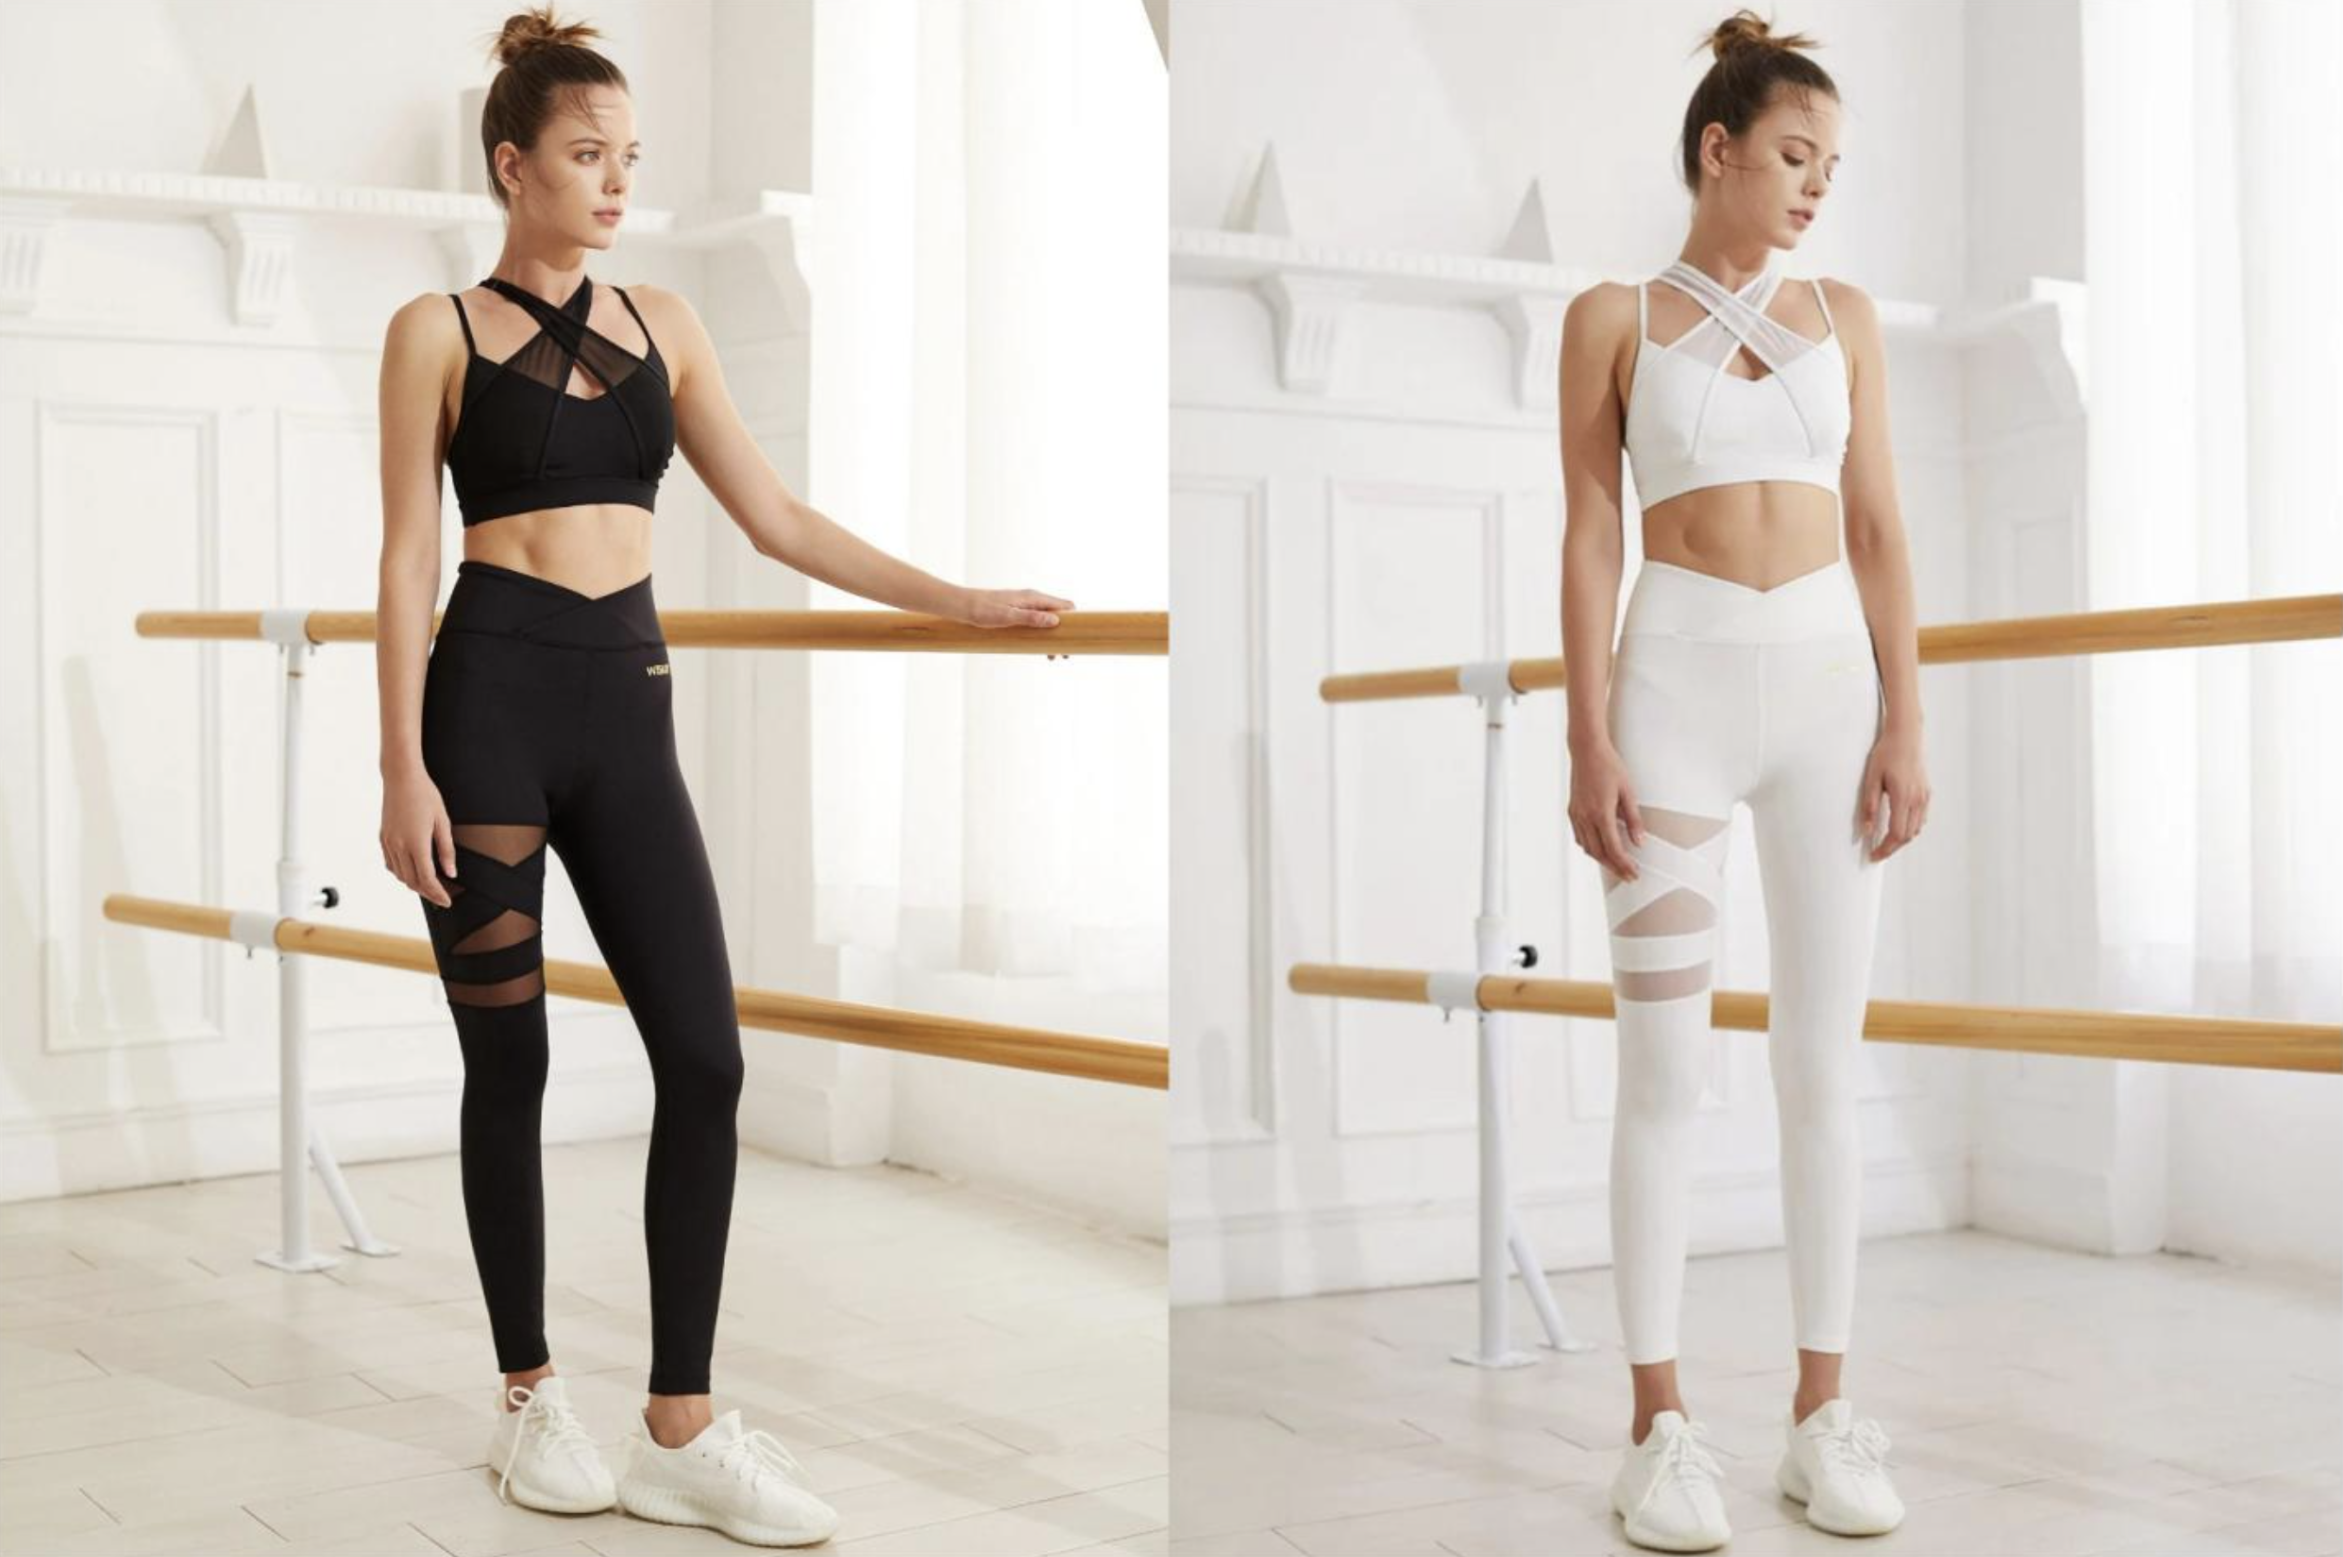 WISKII Active - Time to level up your fitness style! Mix and match